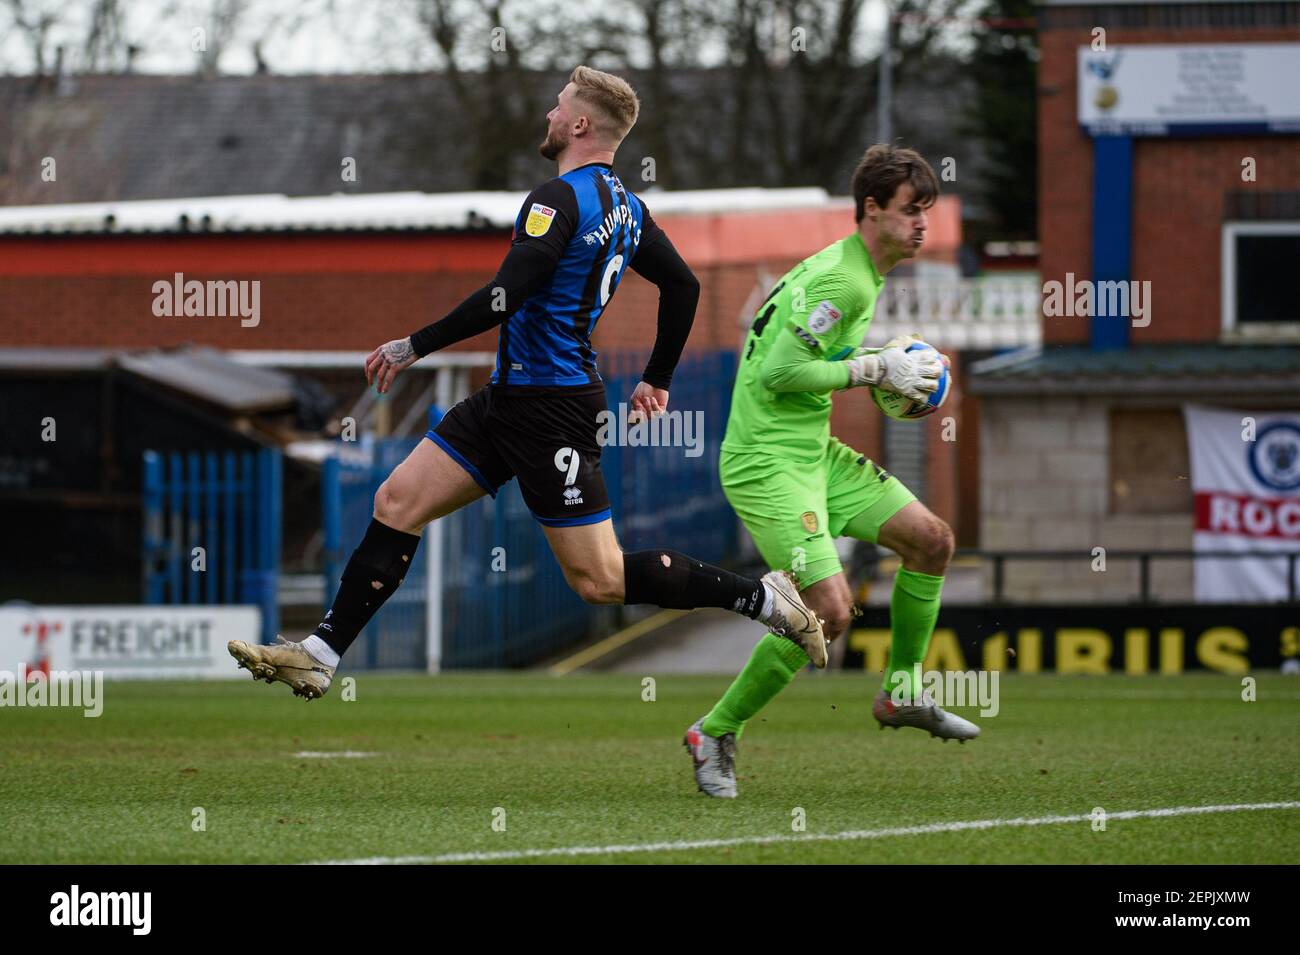 ROCHDALE, ENGLAND. FEB 27TH Keeper Ben Garratt of Burton Albion grabs the ball under pressure from Stephen Humphrys of Rochdale AFC during the Sky Bet League 1 match between Rochdale and Burton Albion at Spotland Stadium, Rochdale on Saturday 27th February 2021. (Credit: Ian Charles | MI News) Credit: MI News & Sport /Alamy Live News Stock Photo